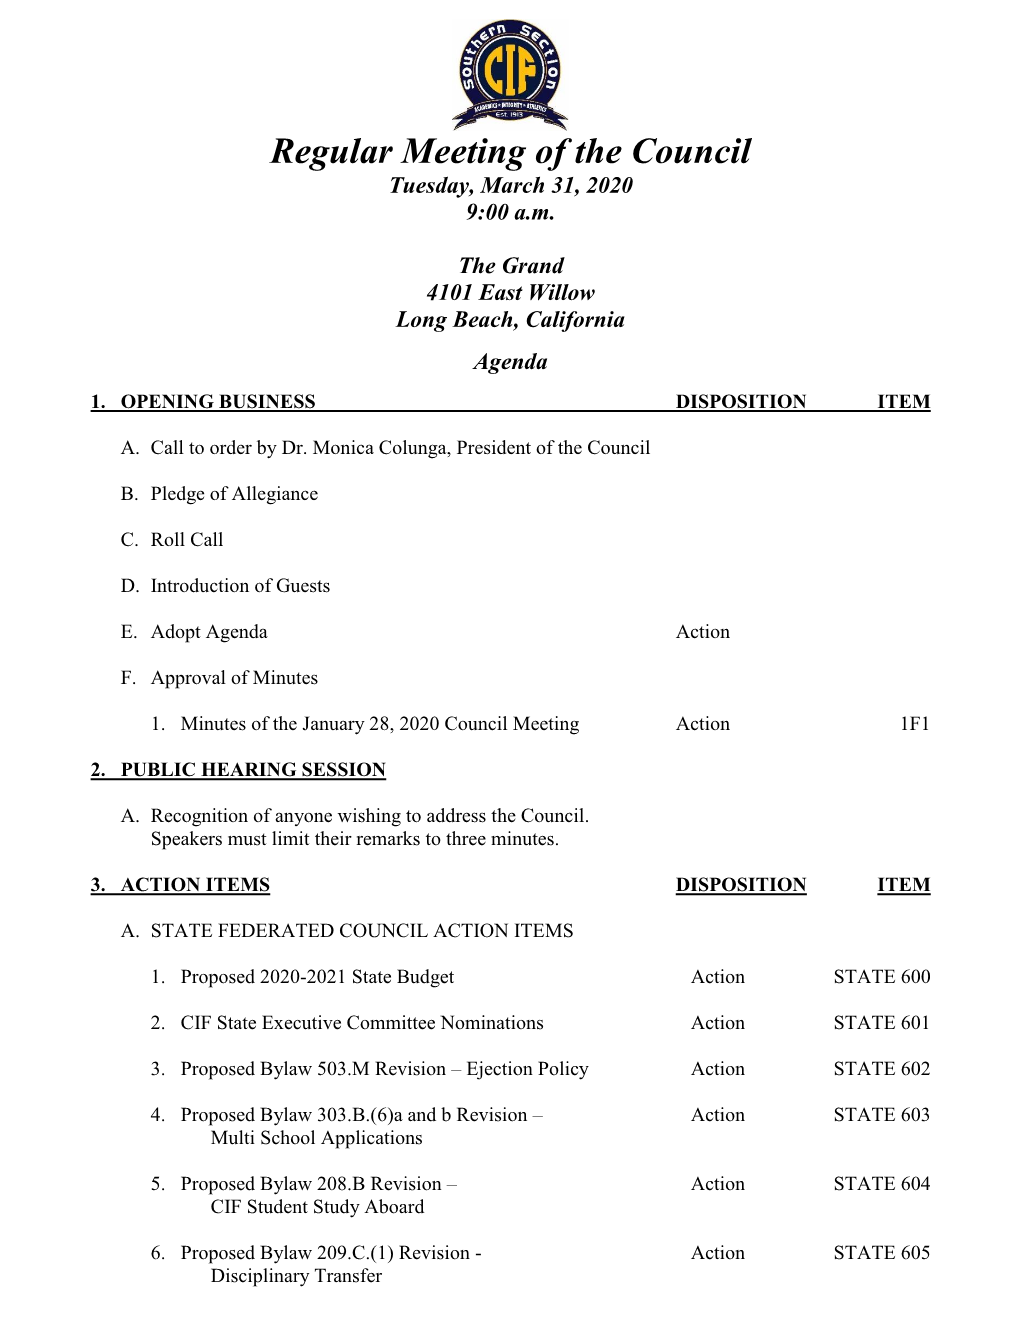 Regular Meeting of the Council Tuesday, March 31, 2020 9:00 A.M